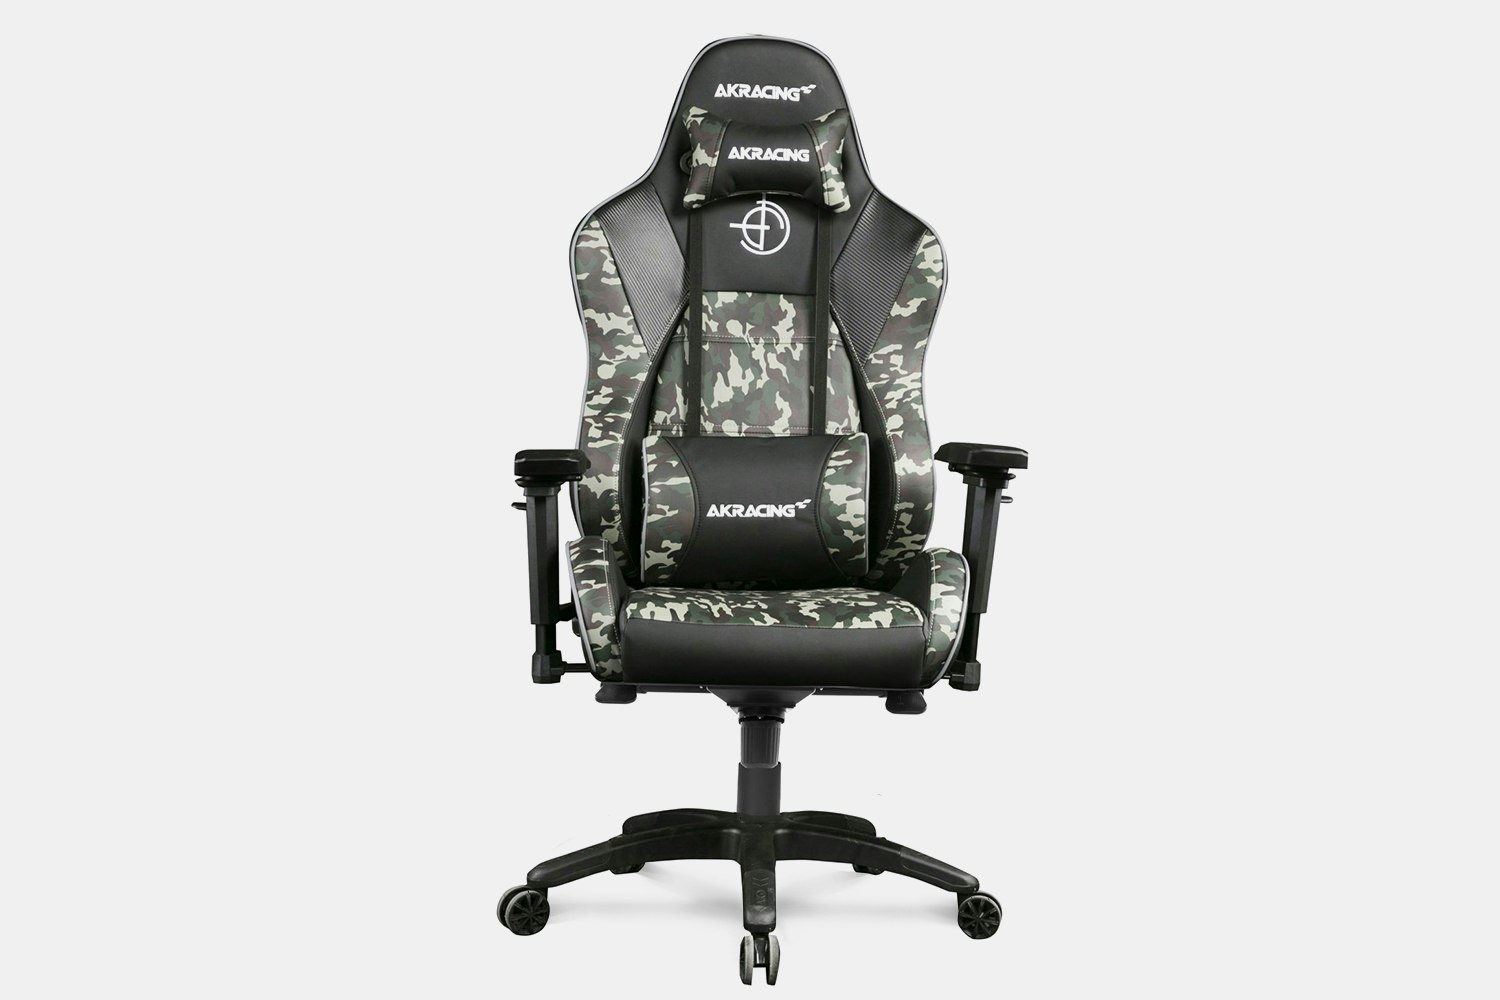 AKRacing Premium Masters Series Chairs | Chairs | Computer Chairs